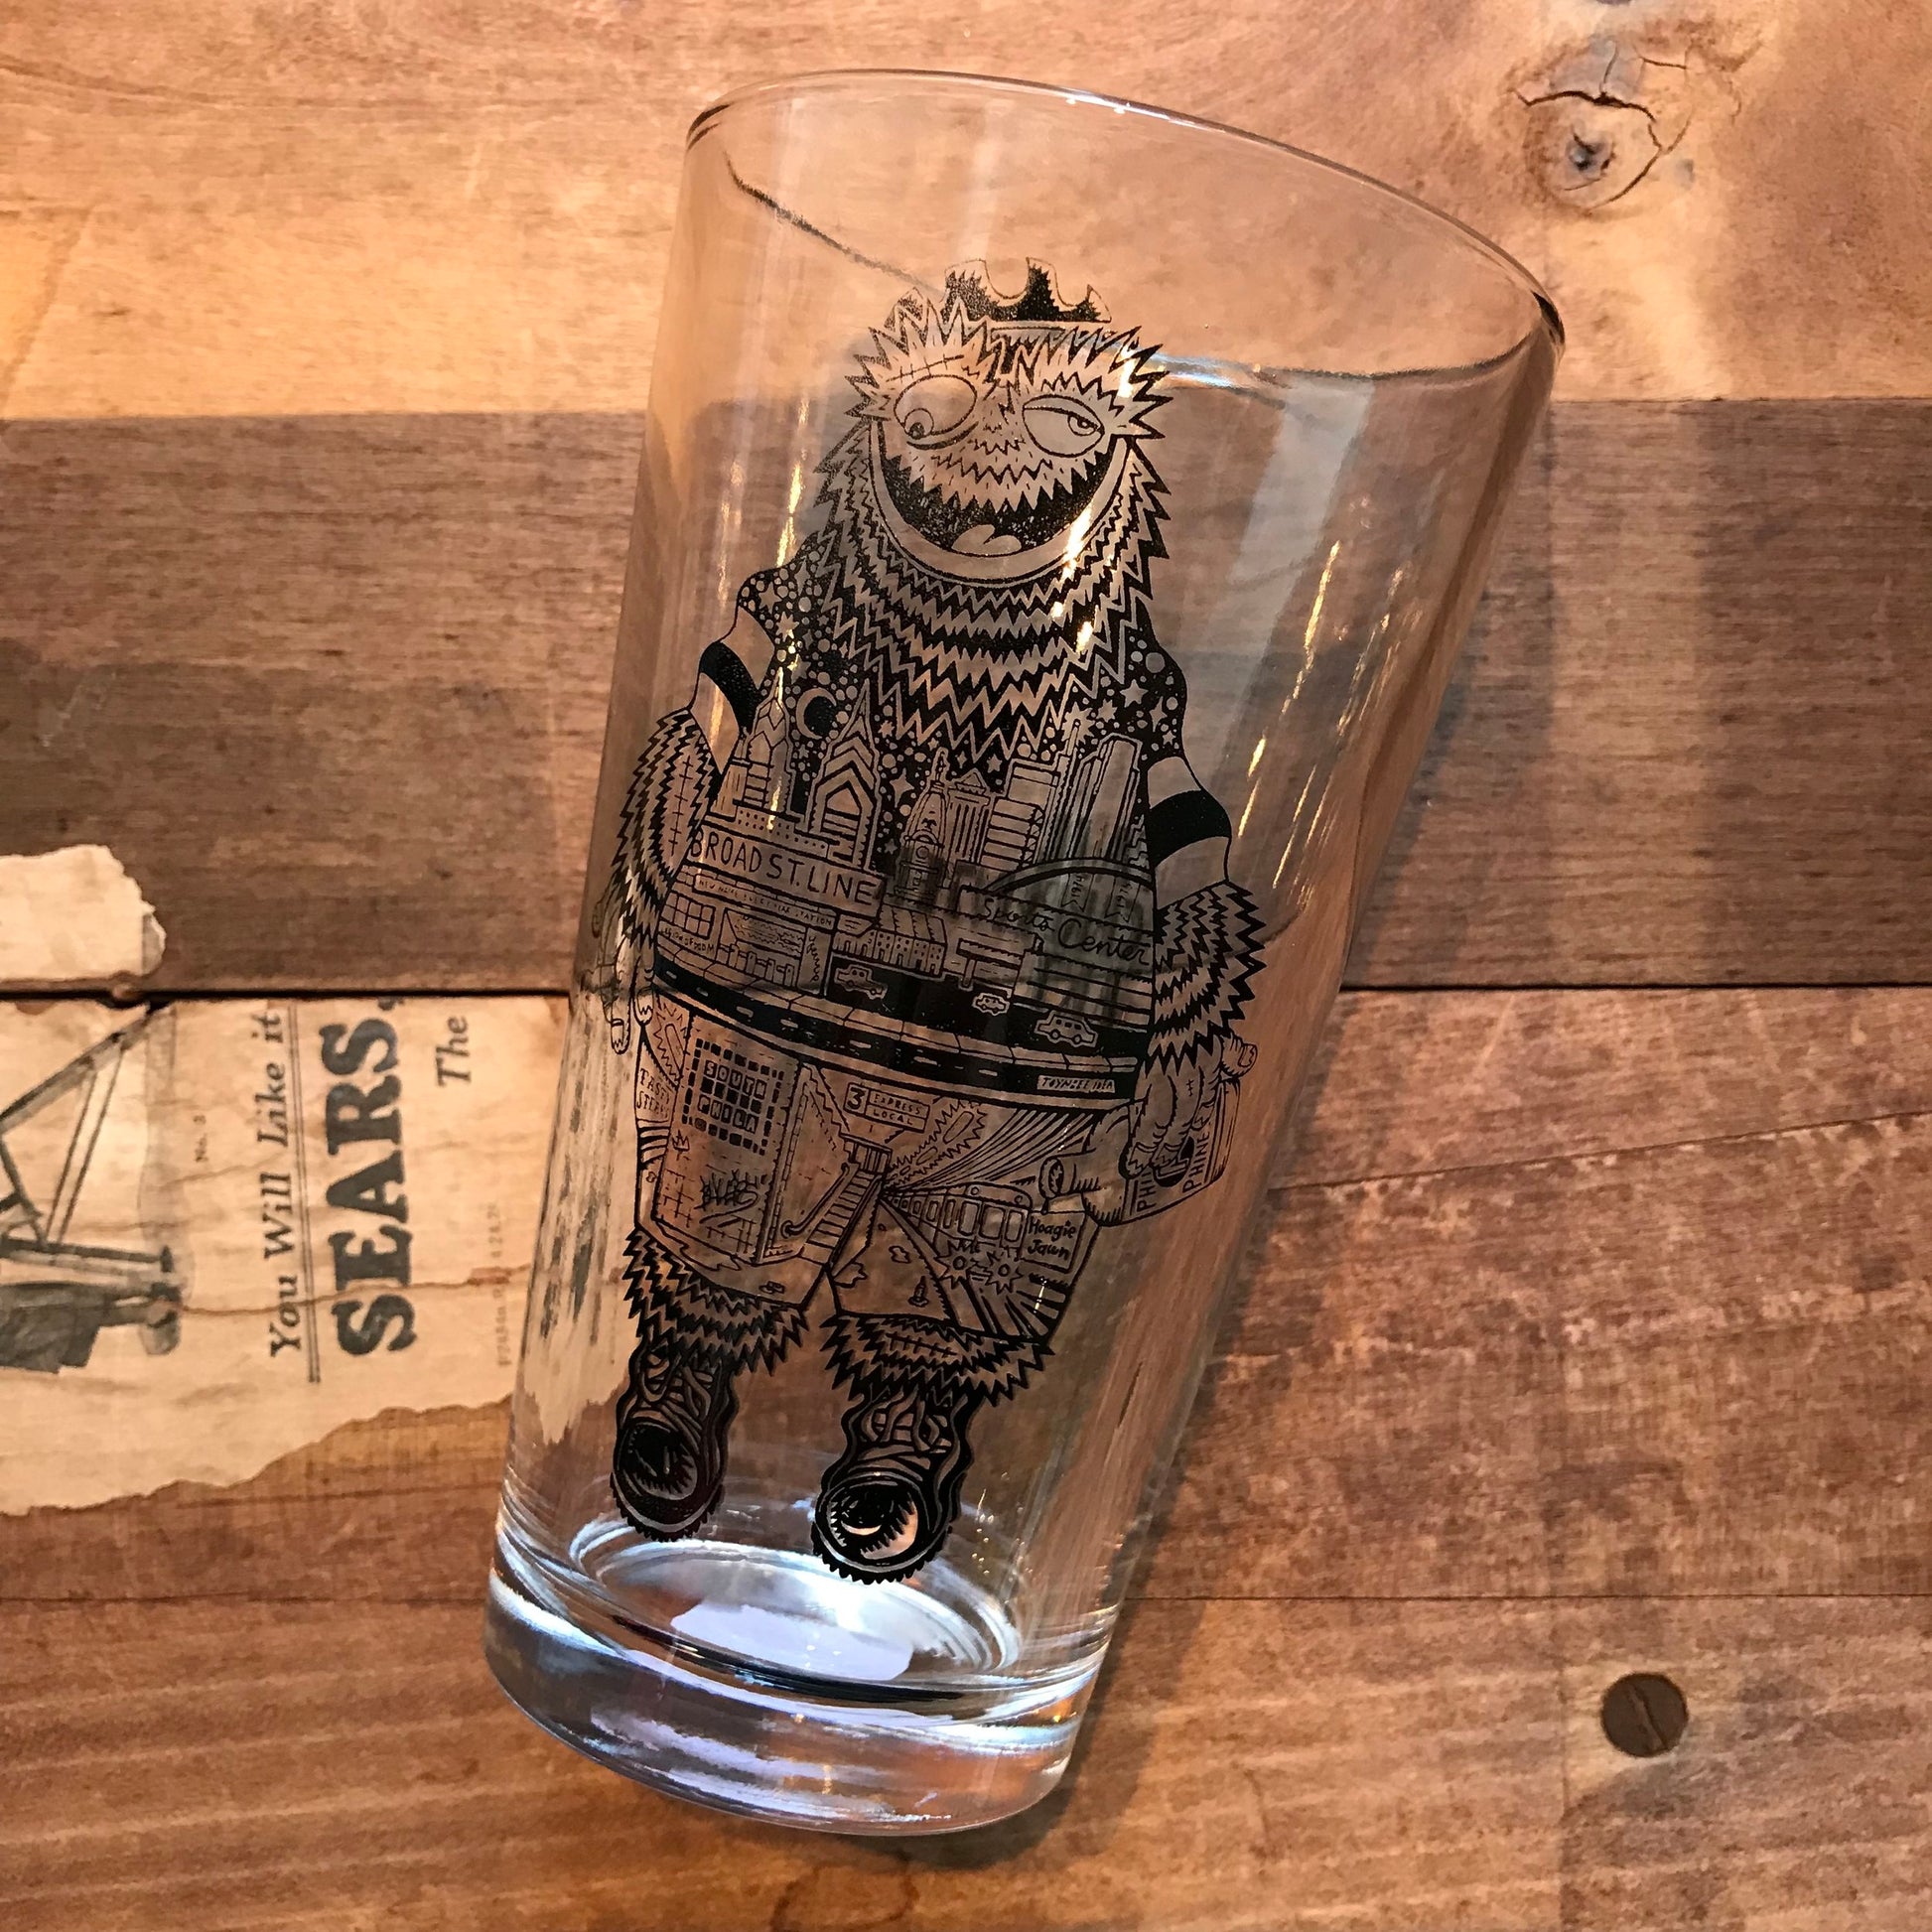 A Paul Carpenter Philly Pint Glass with an intricate illustration of a mythical creature and the city skyline printed on it, placed on a wooden surface.